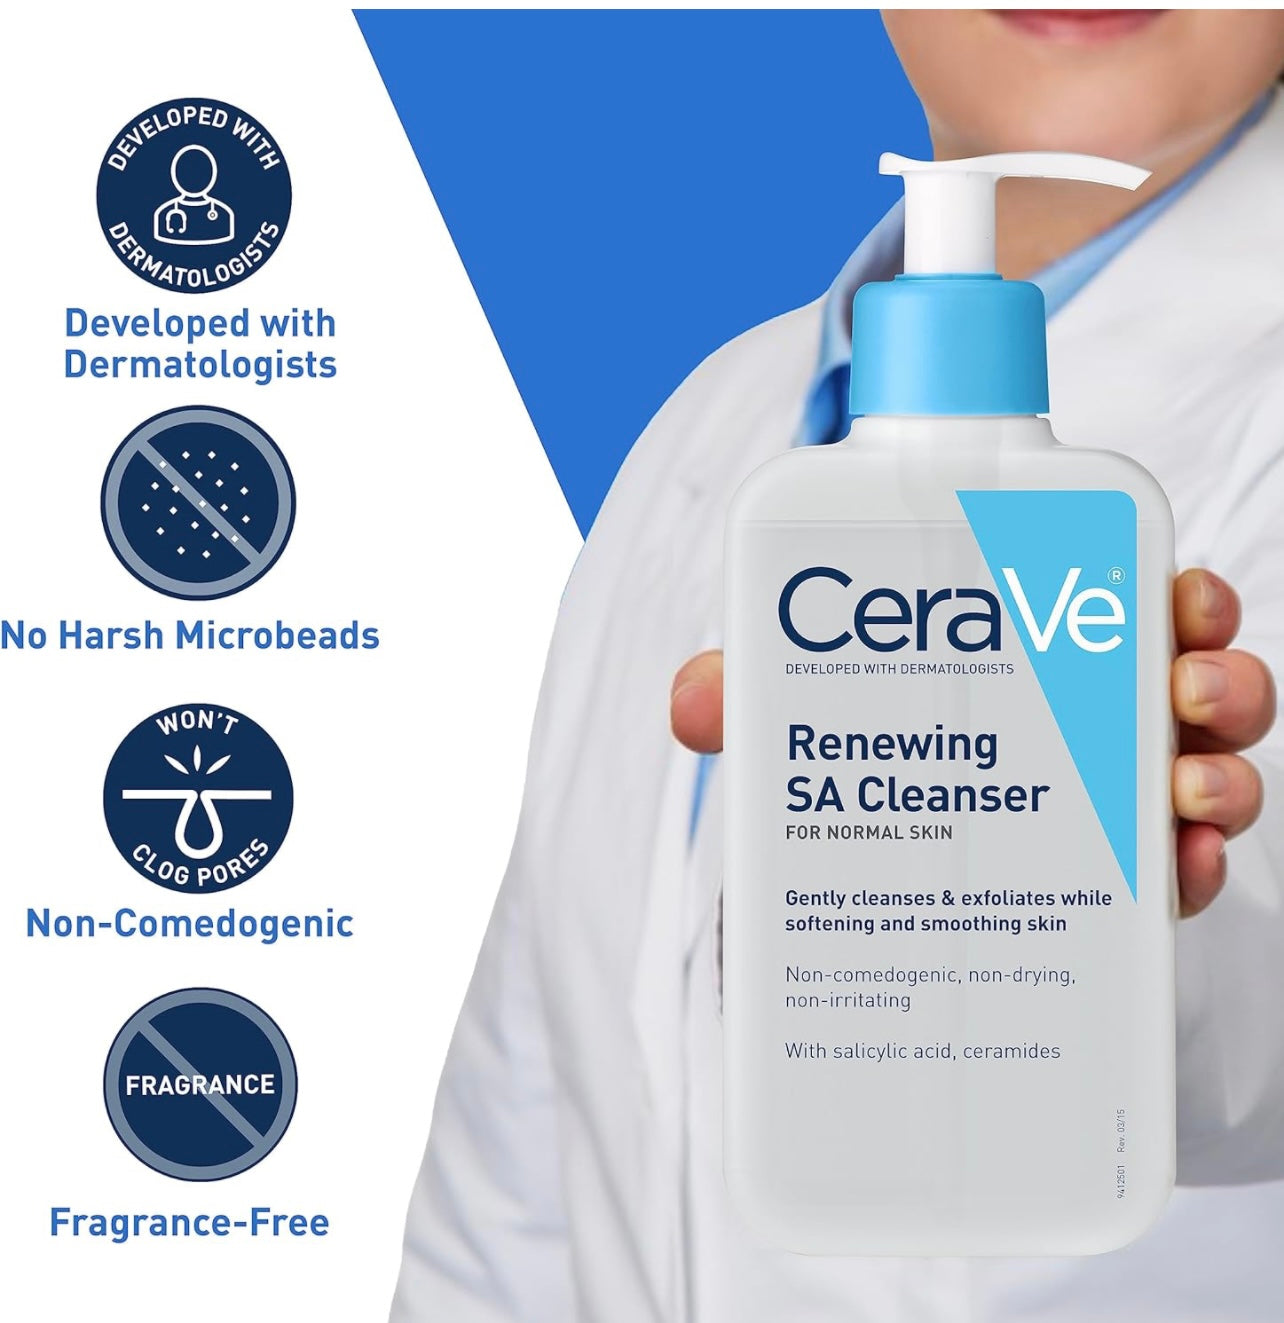 CERAVE RENEWING SA CLEANSER